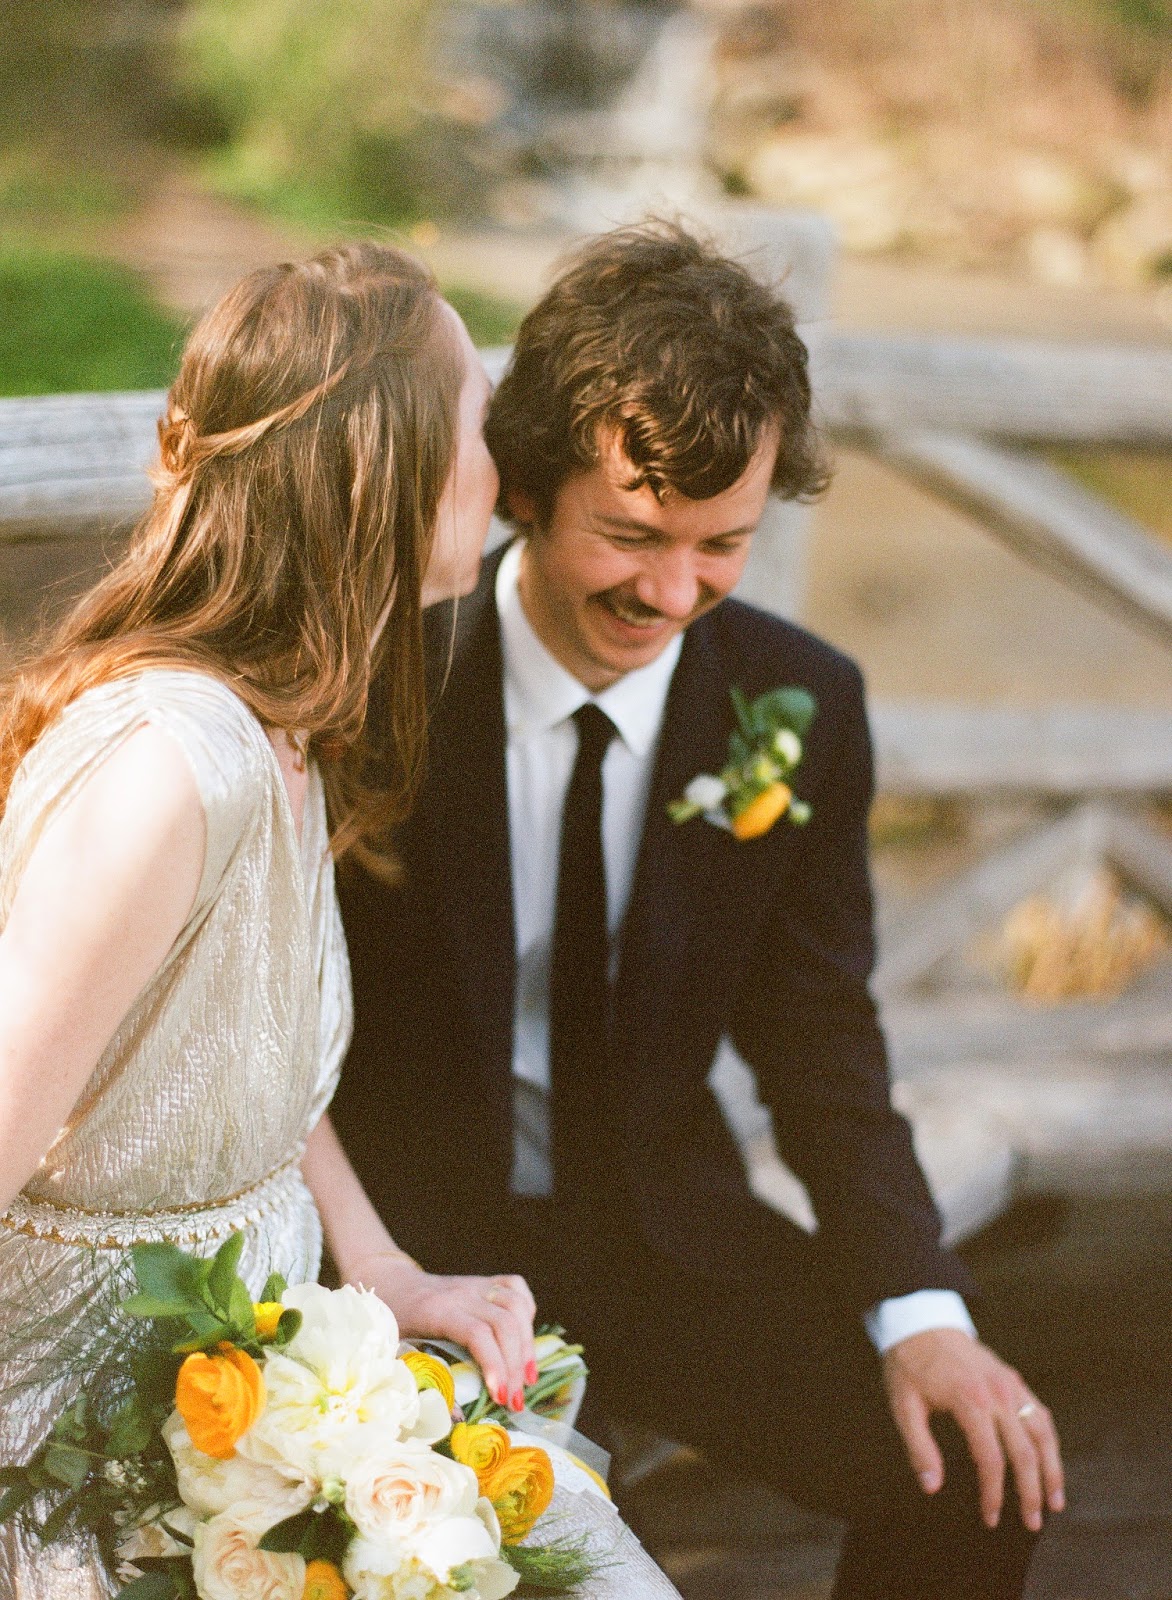 intimate moment between bride and groom in prospect park, brooklyn, new york with yellow ranunculus and white peony spring bouquet and boutonniere